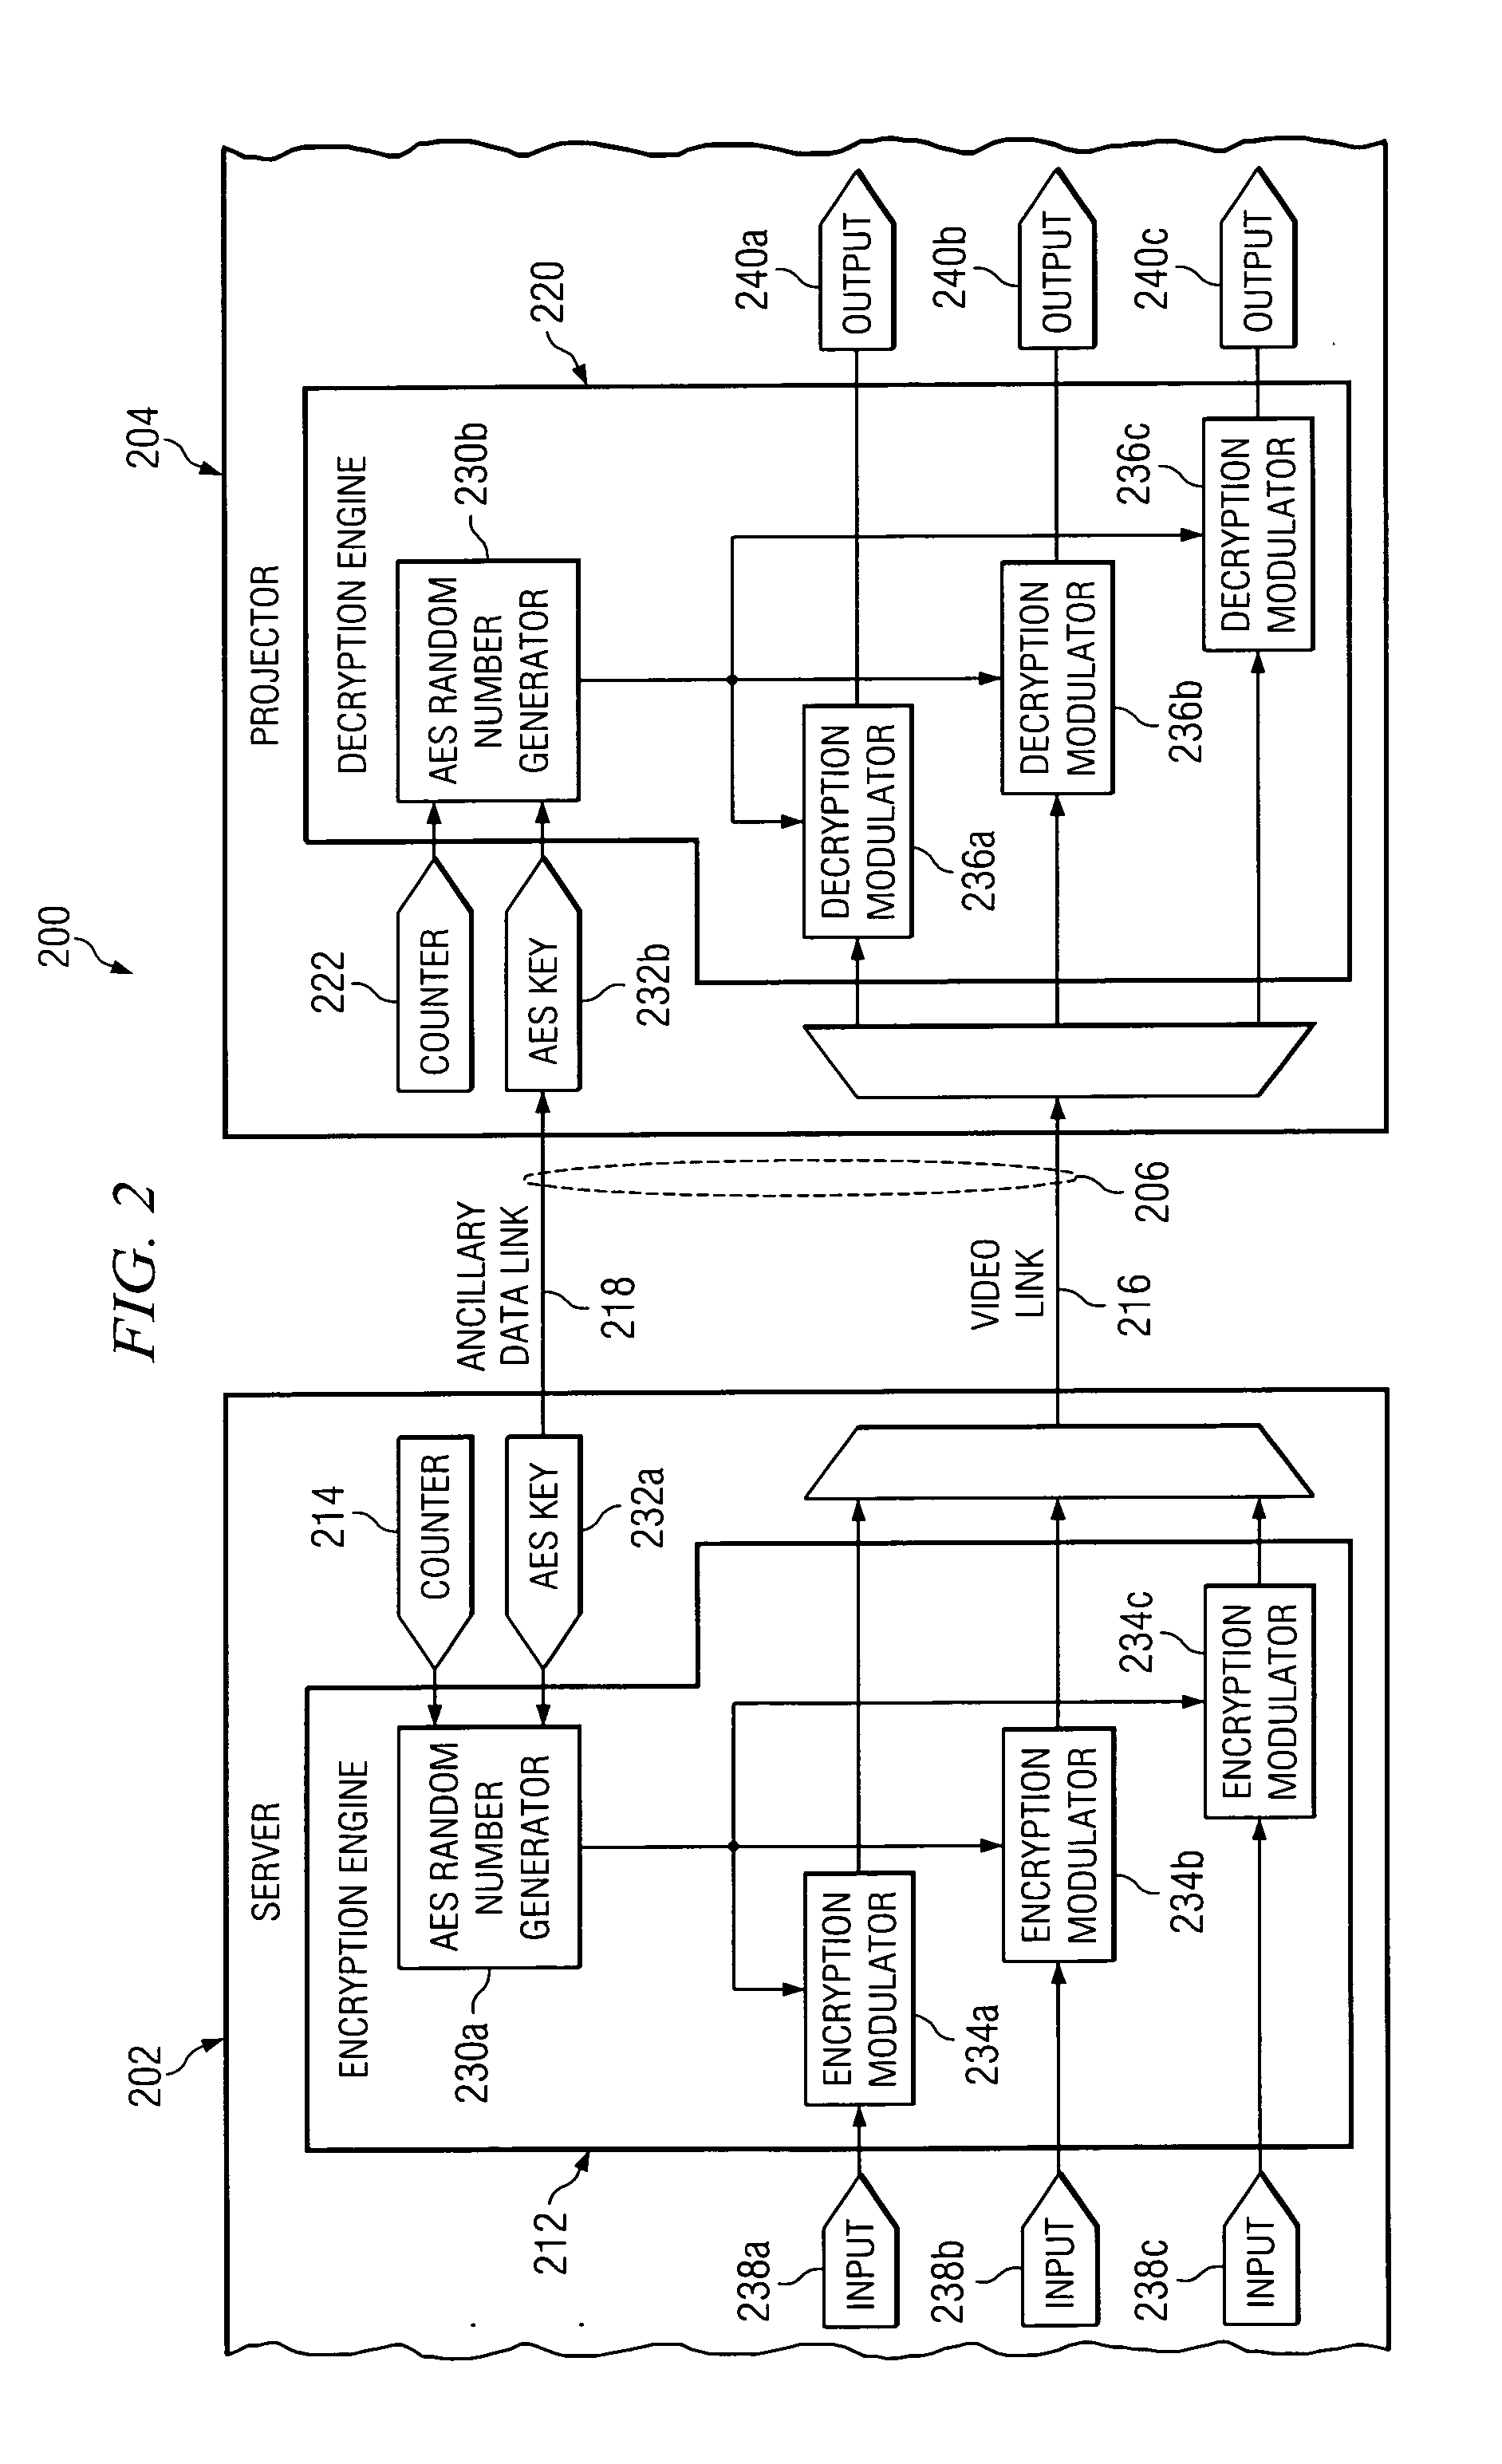 System and method for bit stream compatible local link encryption